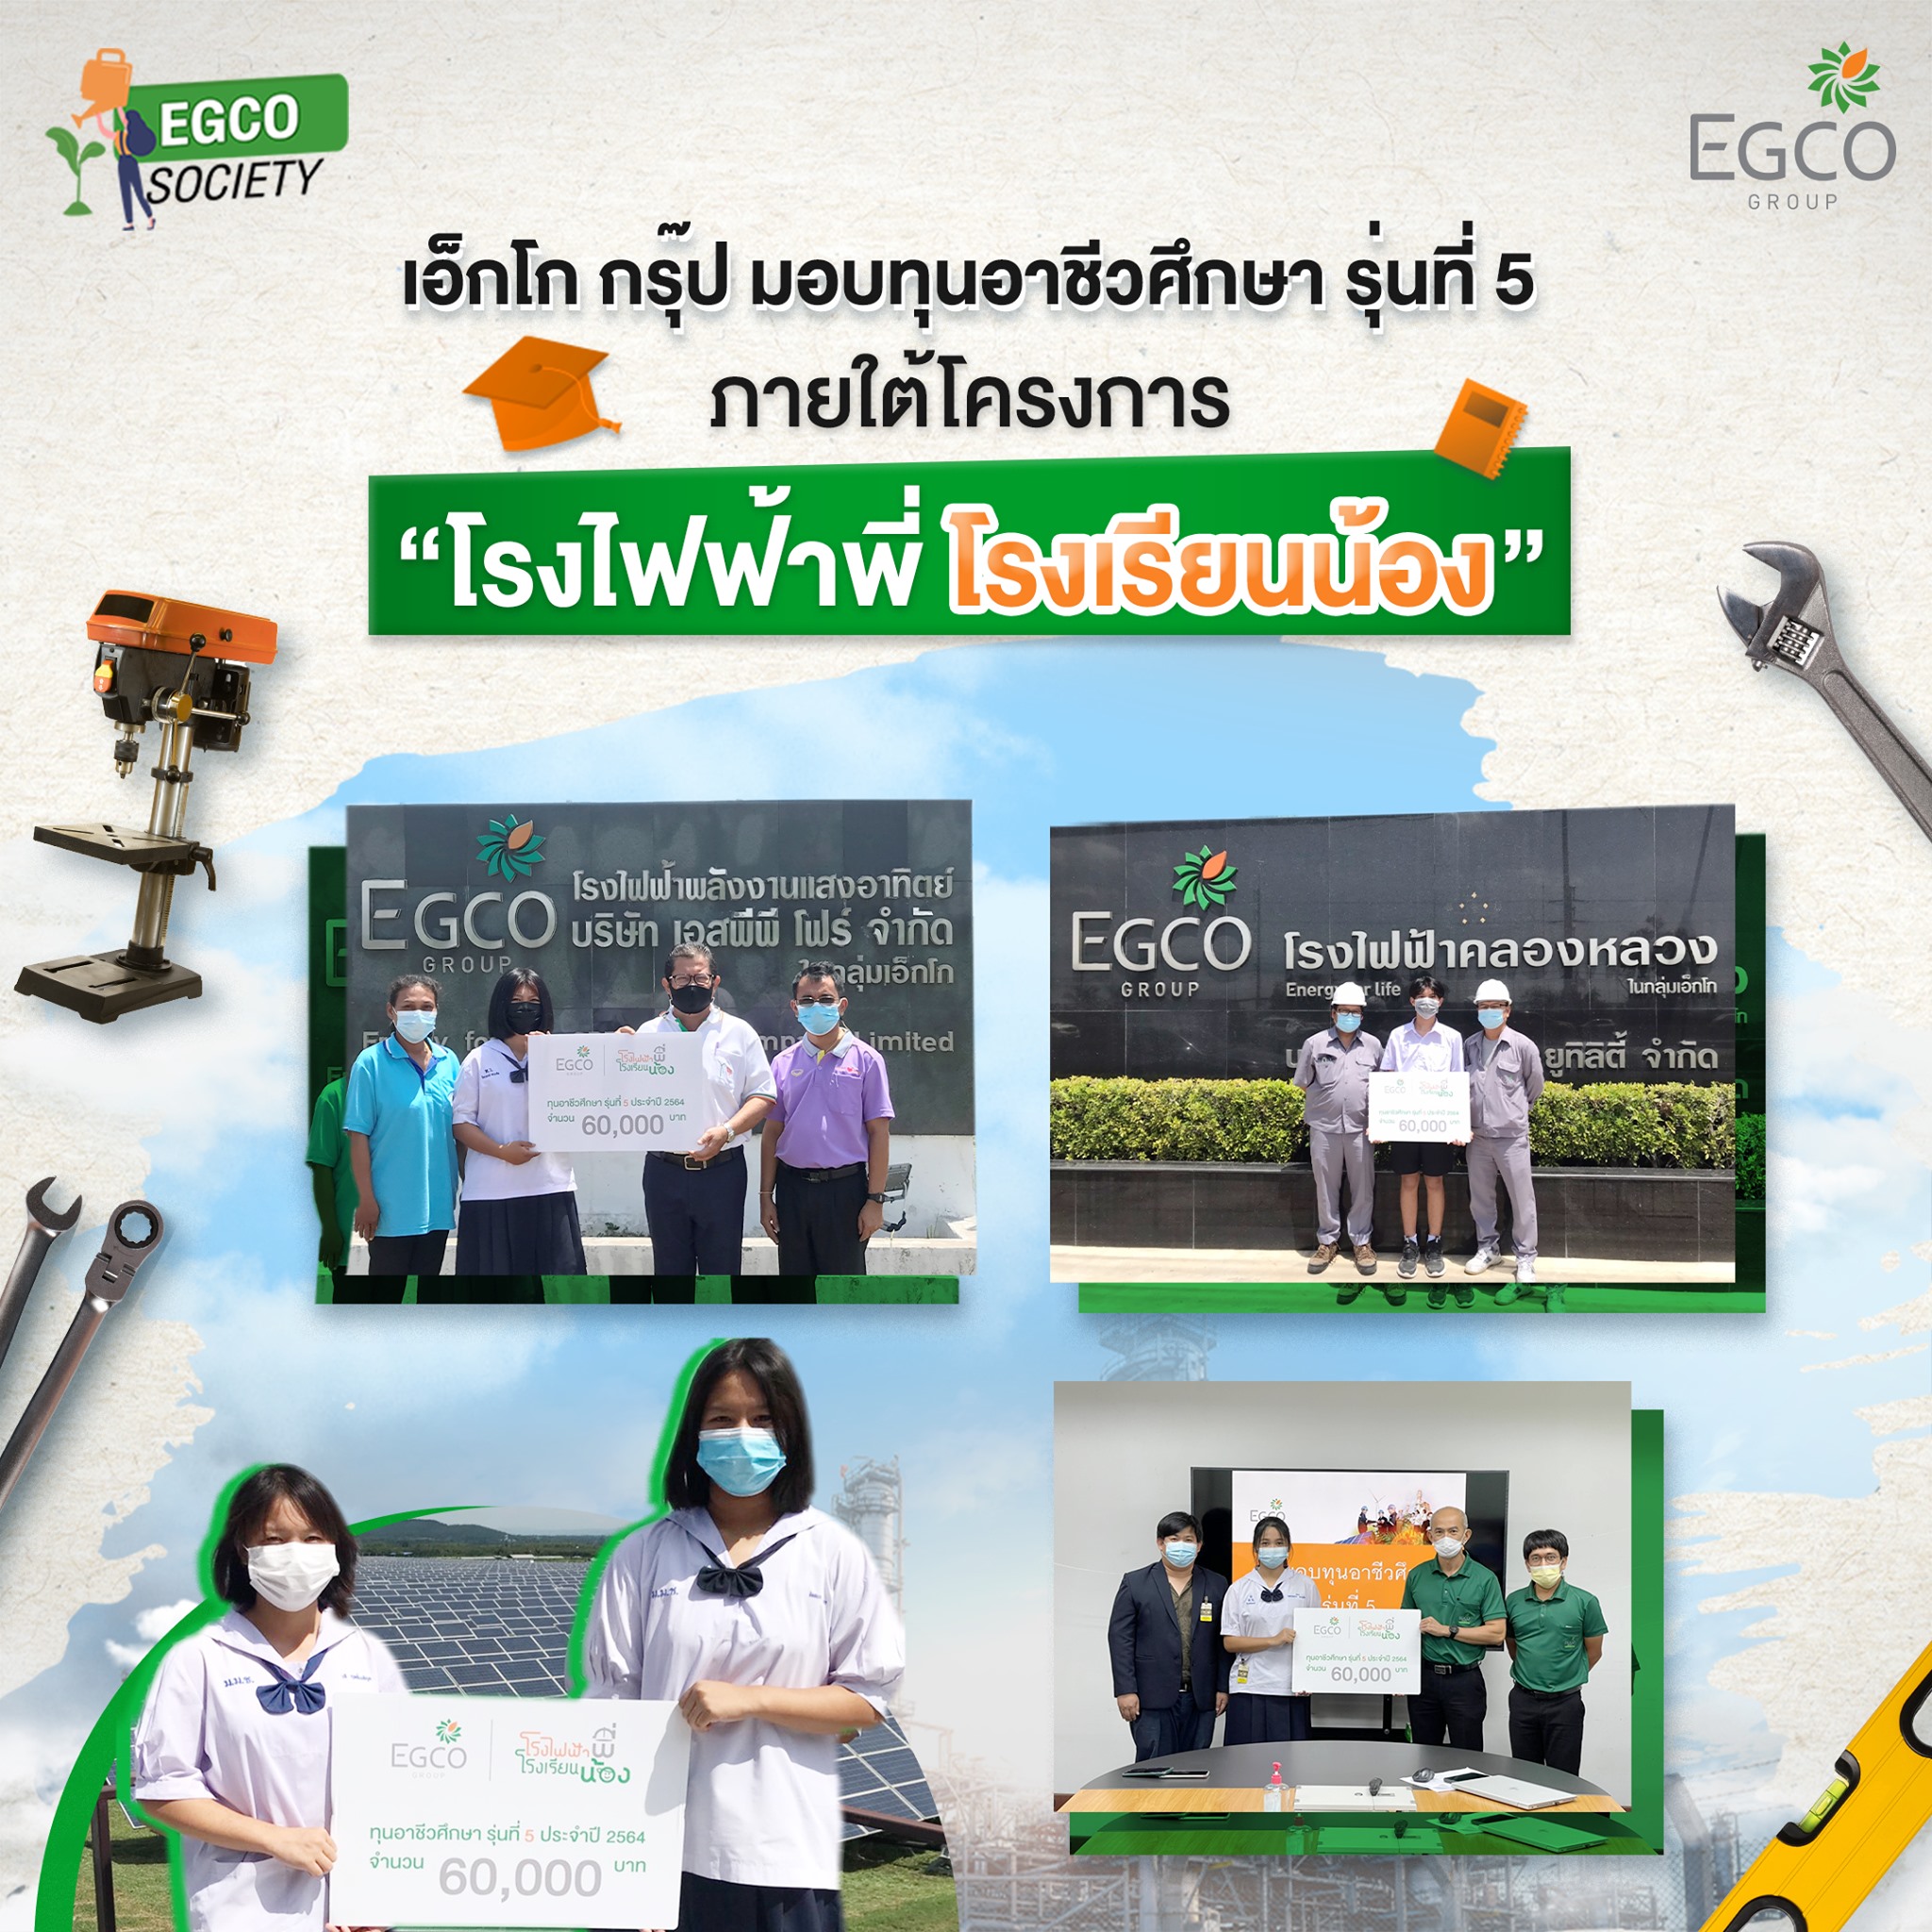 EGCO Group provide over 25 scholarships for vocational education under the “Rong Fai Fah Phee, Rong Rien Nong” project to the youth from 12 schools around the egco group power plants